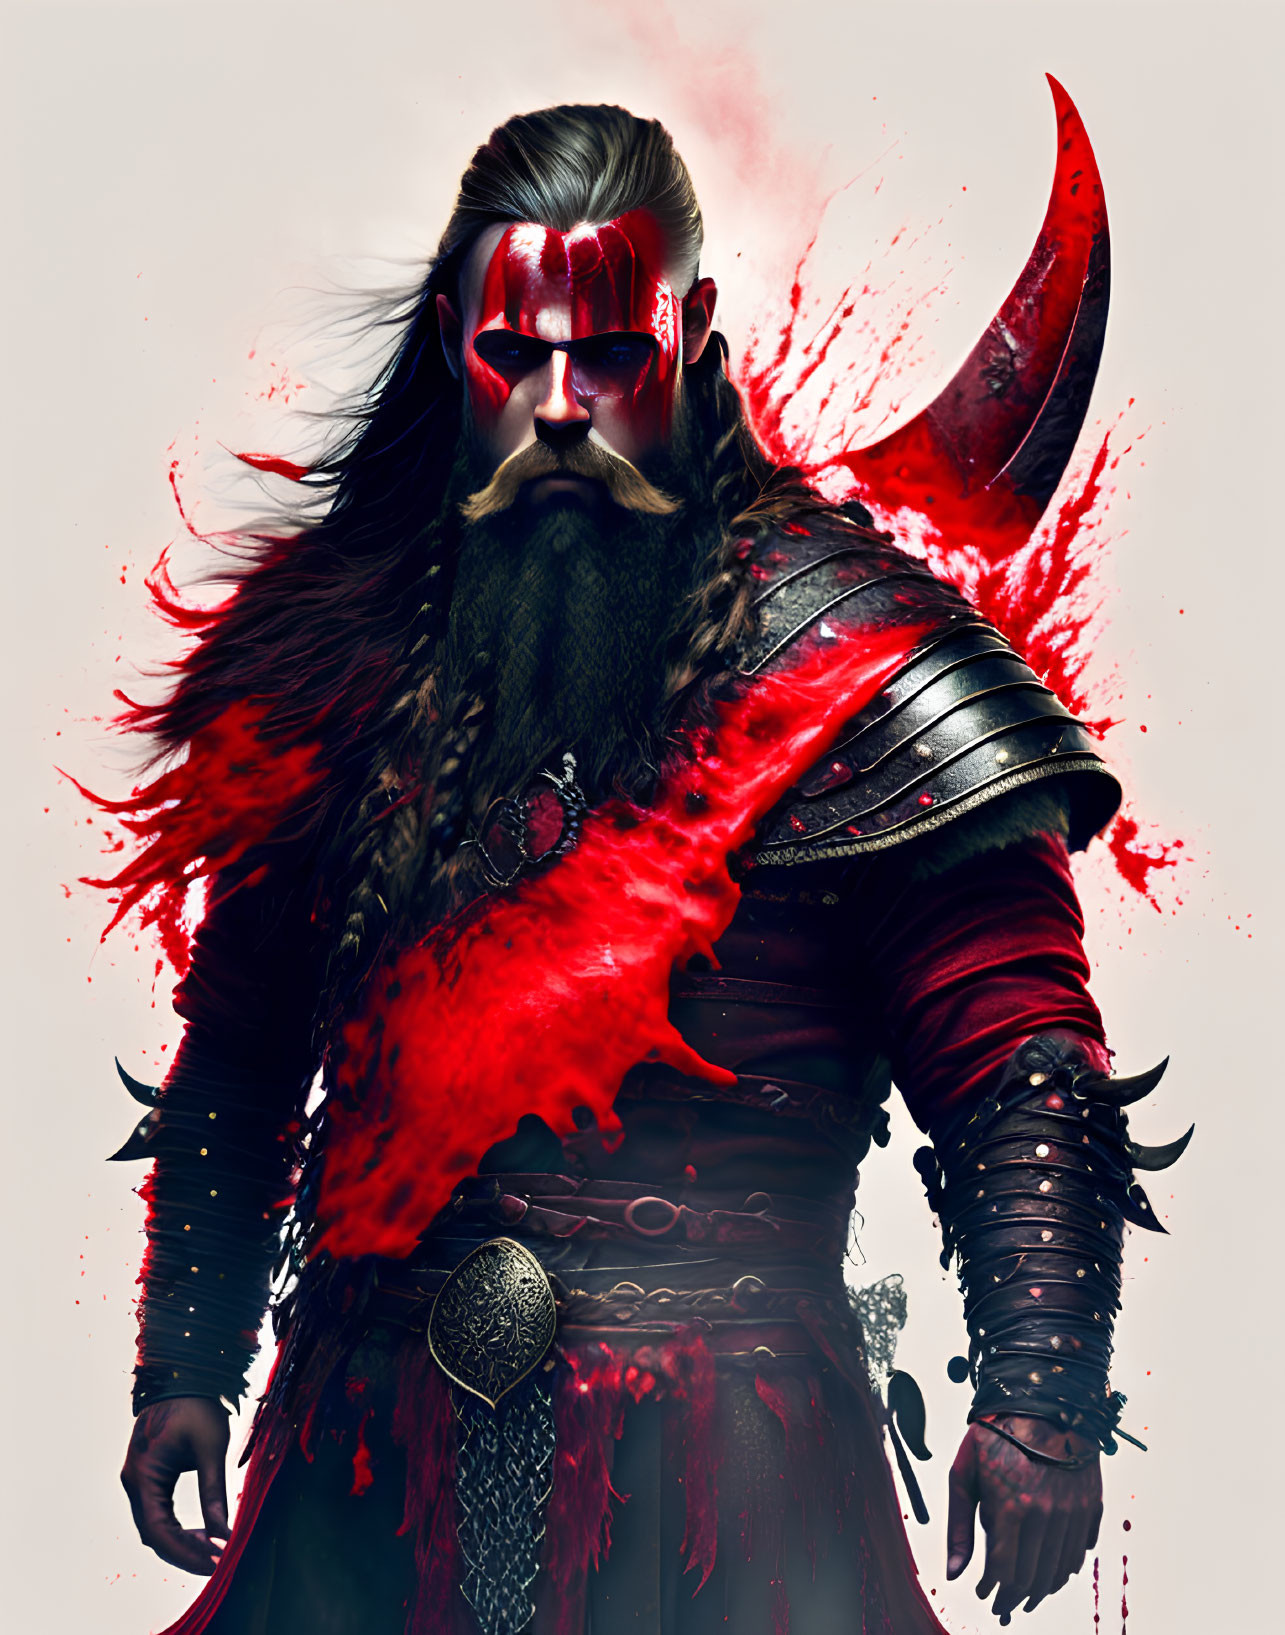 Warrior with red visor and axe in dark armor on white background